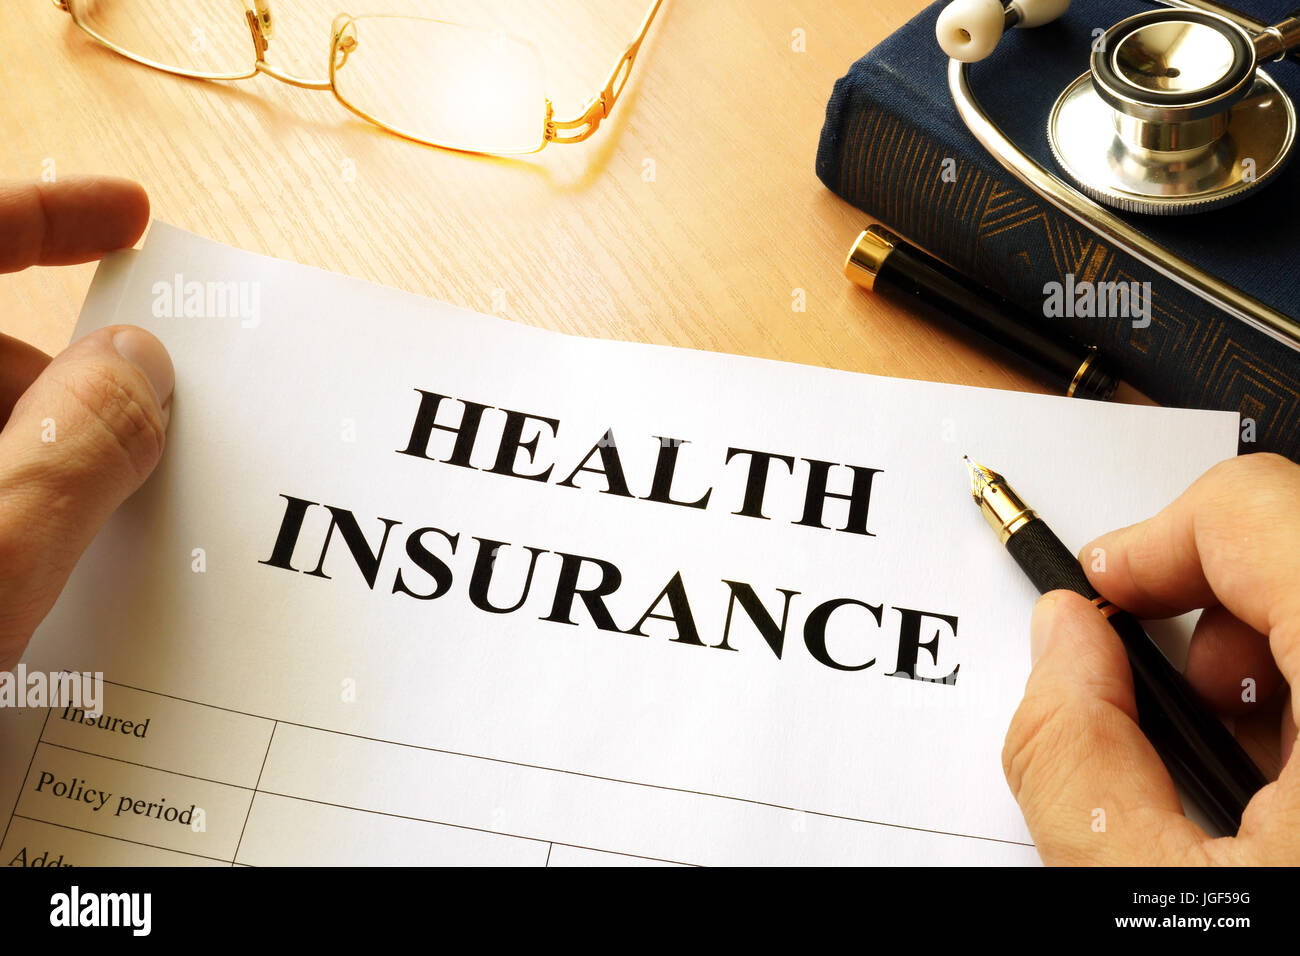 Health insurance policy on a table. Stock Photo